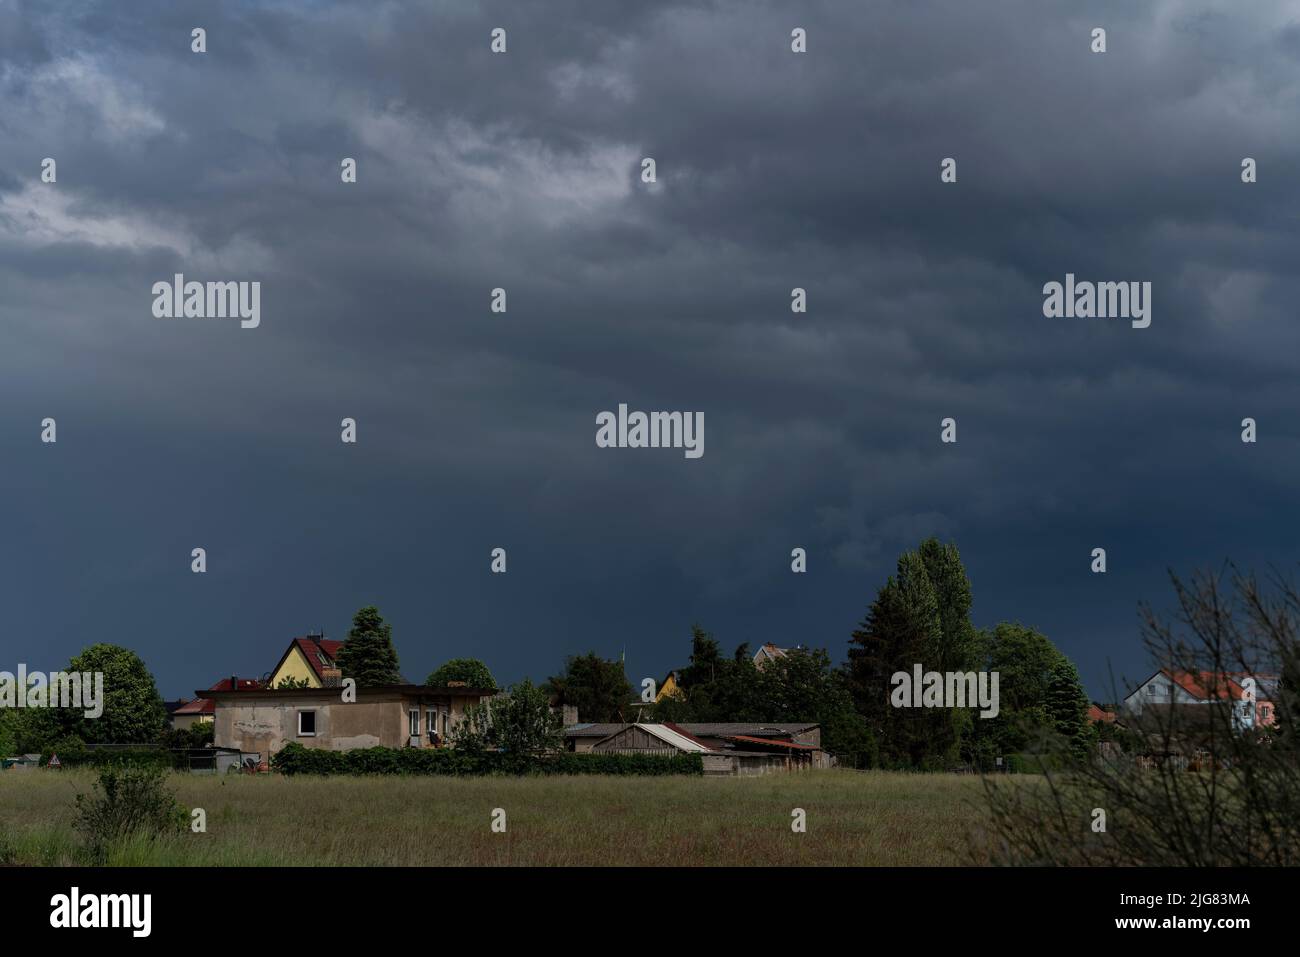 Large rain clouds over a small village just before a bad storm Stock Photo